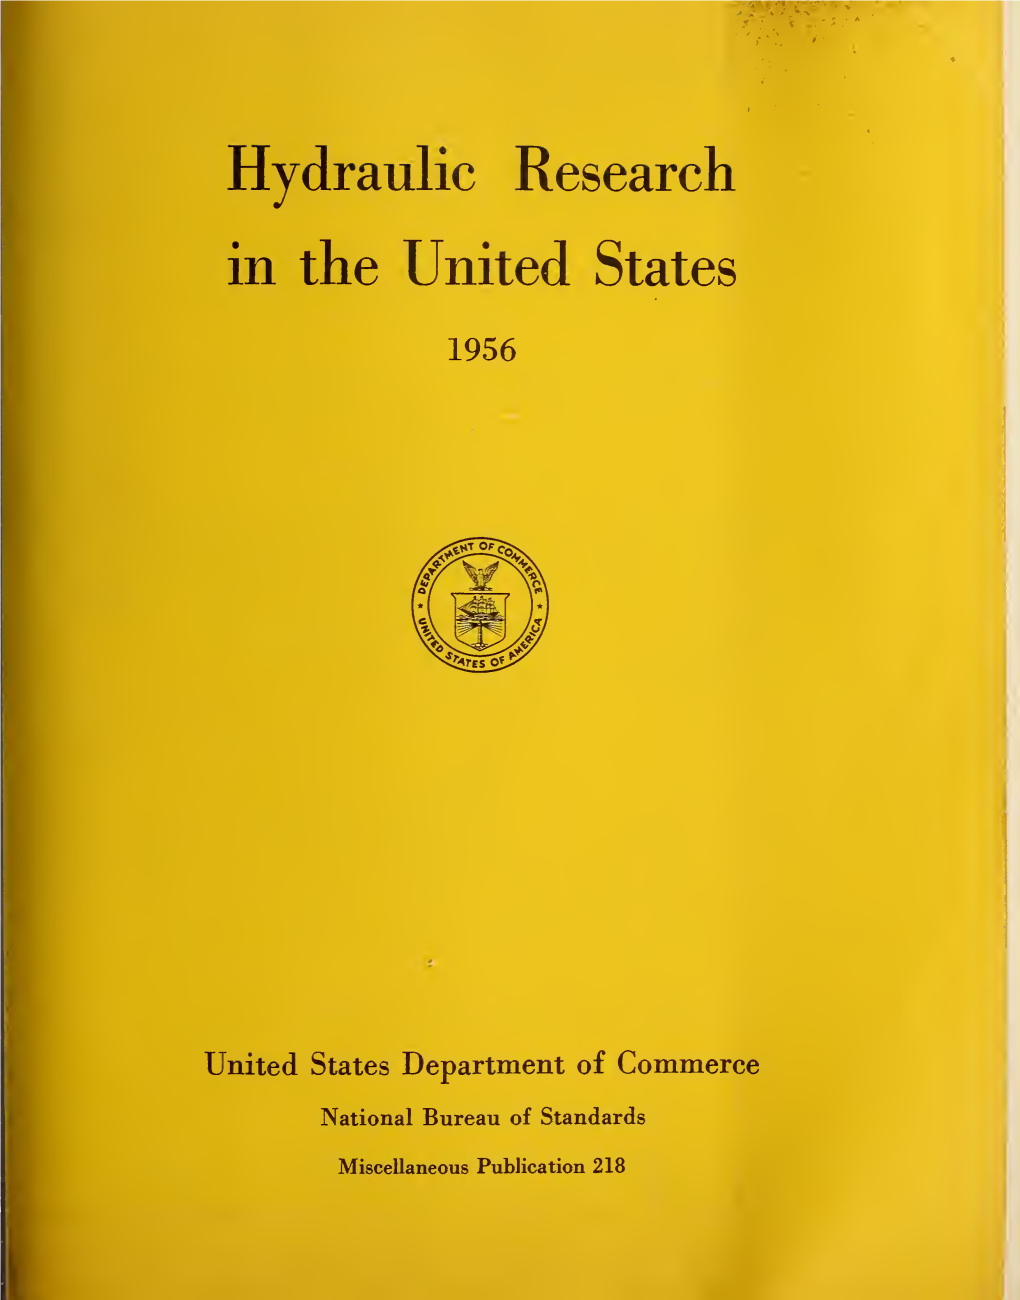 Hydraulic Research in the United States 1956